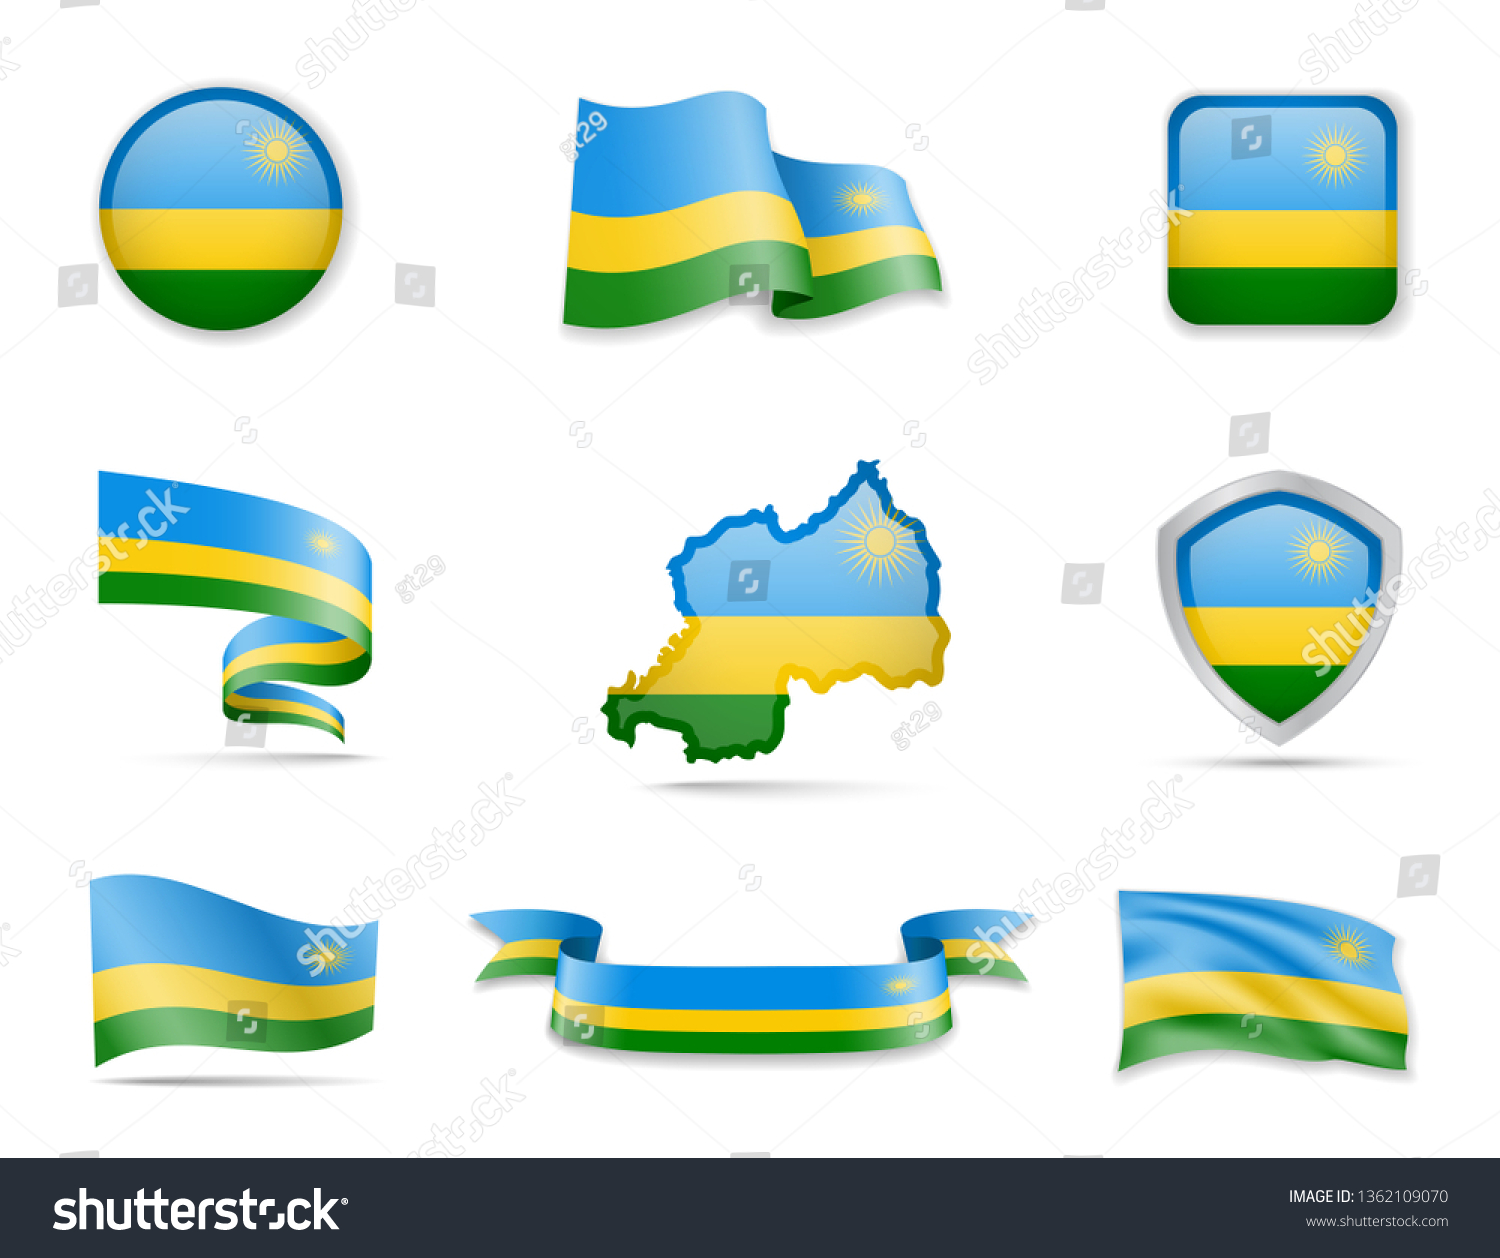 Rwanda Flags Collection Flags And Outline Of Royalty Free Stock Vector 1362109070